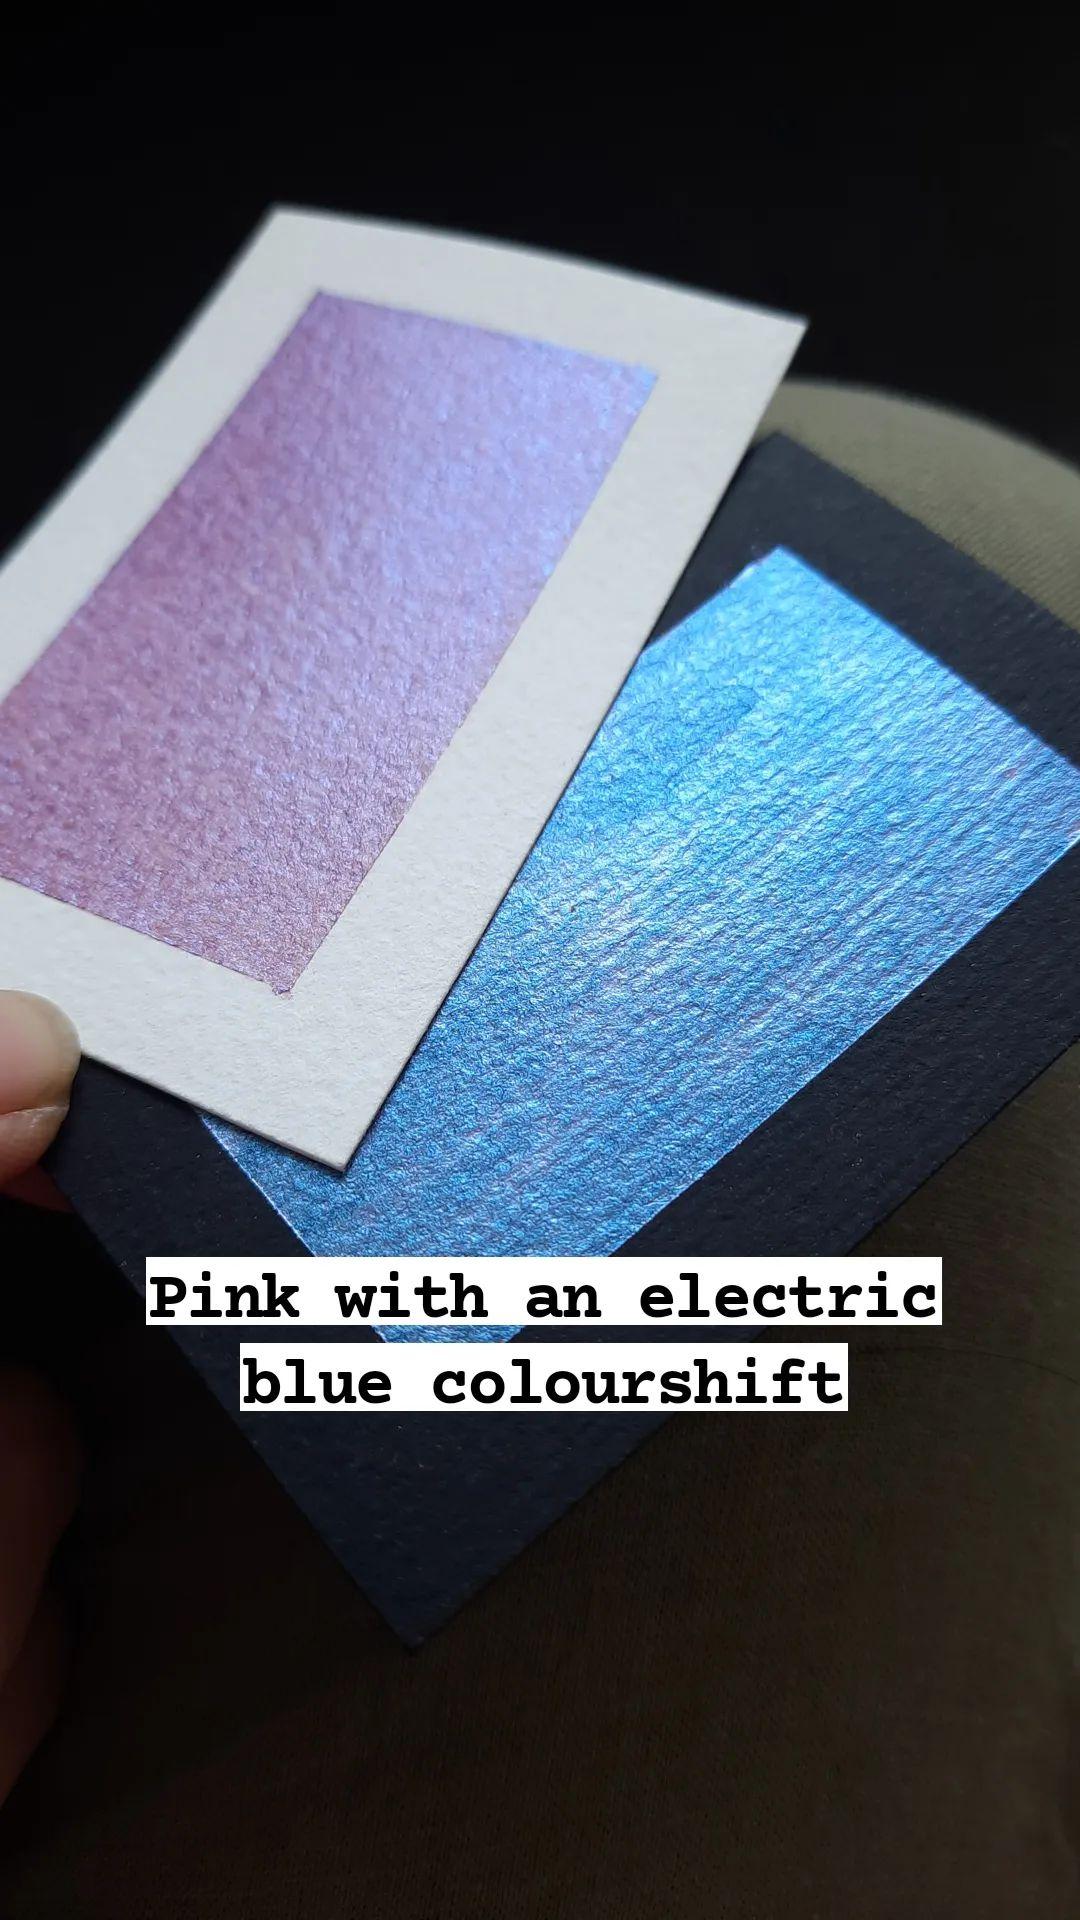 Discontinued - "Electric Pink" - Duochrome Pink/Blue Shimmer - Individual Half Pan